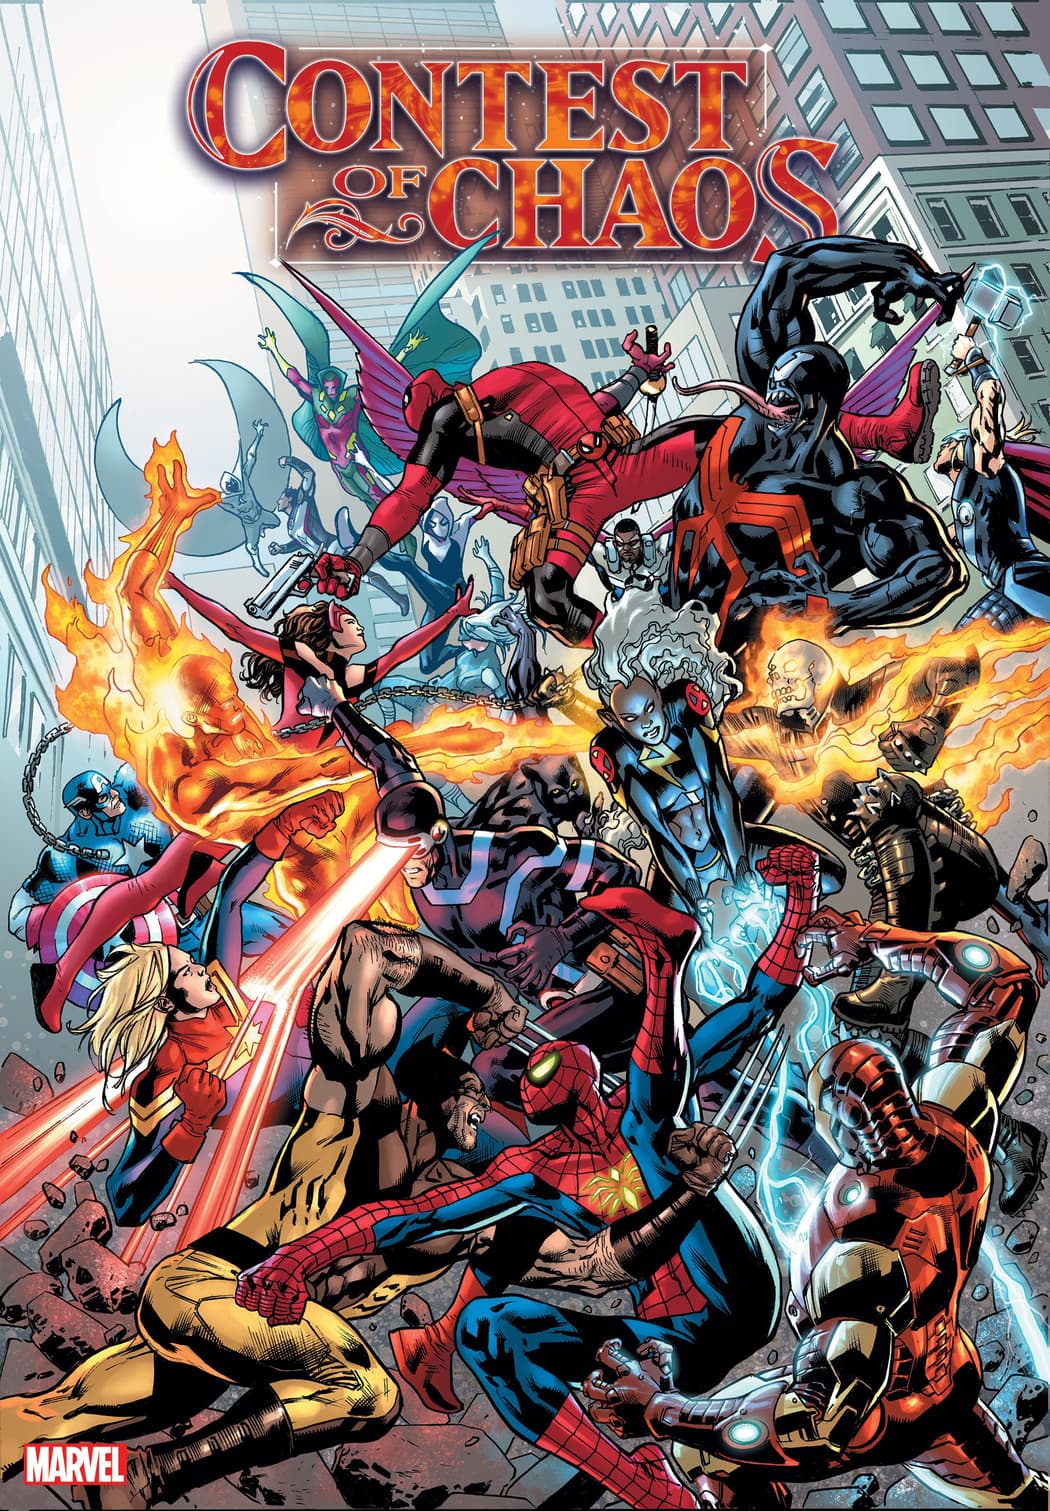 CONTEST OF CHAOS promotional artwork by Bryan Hitch